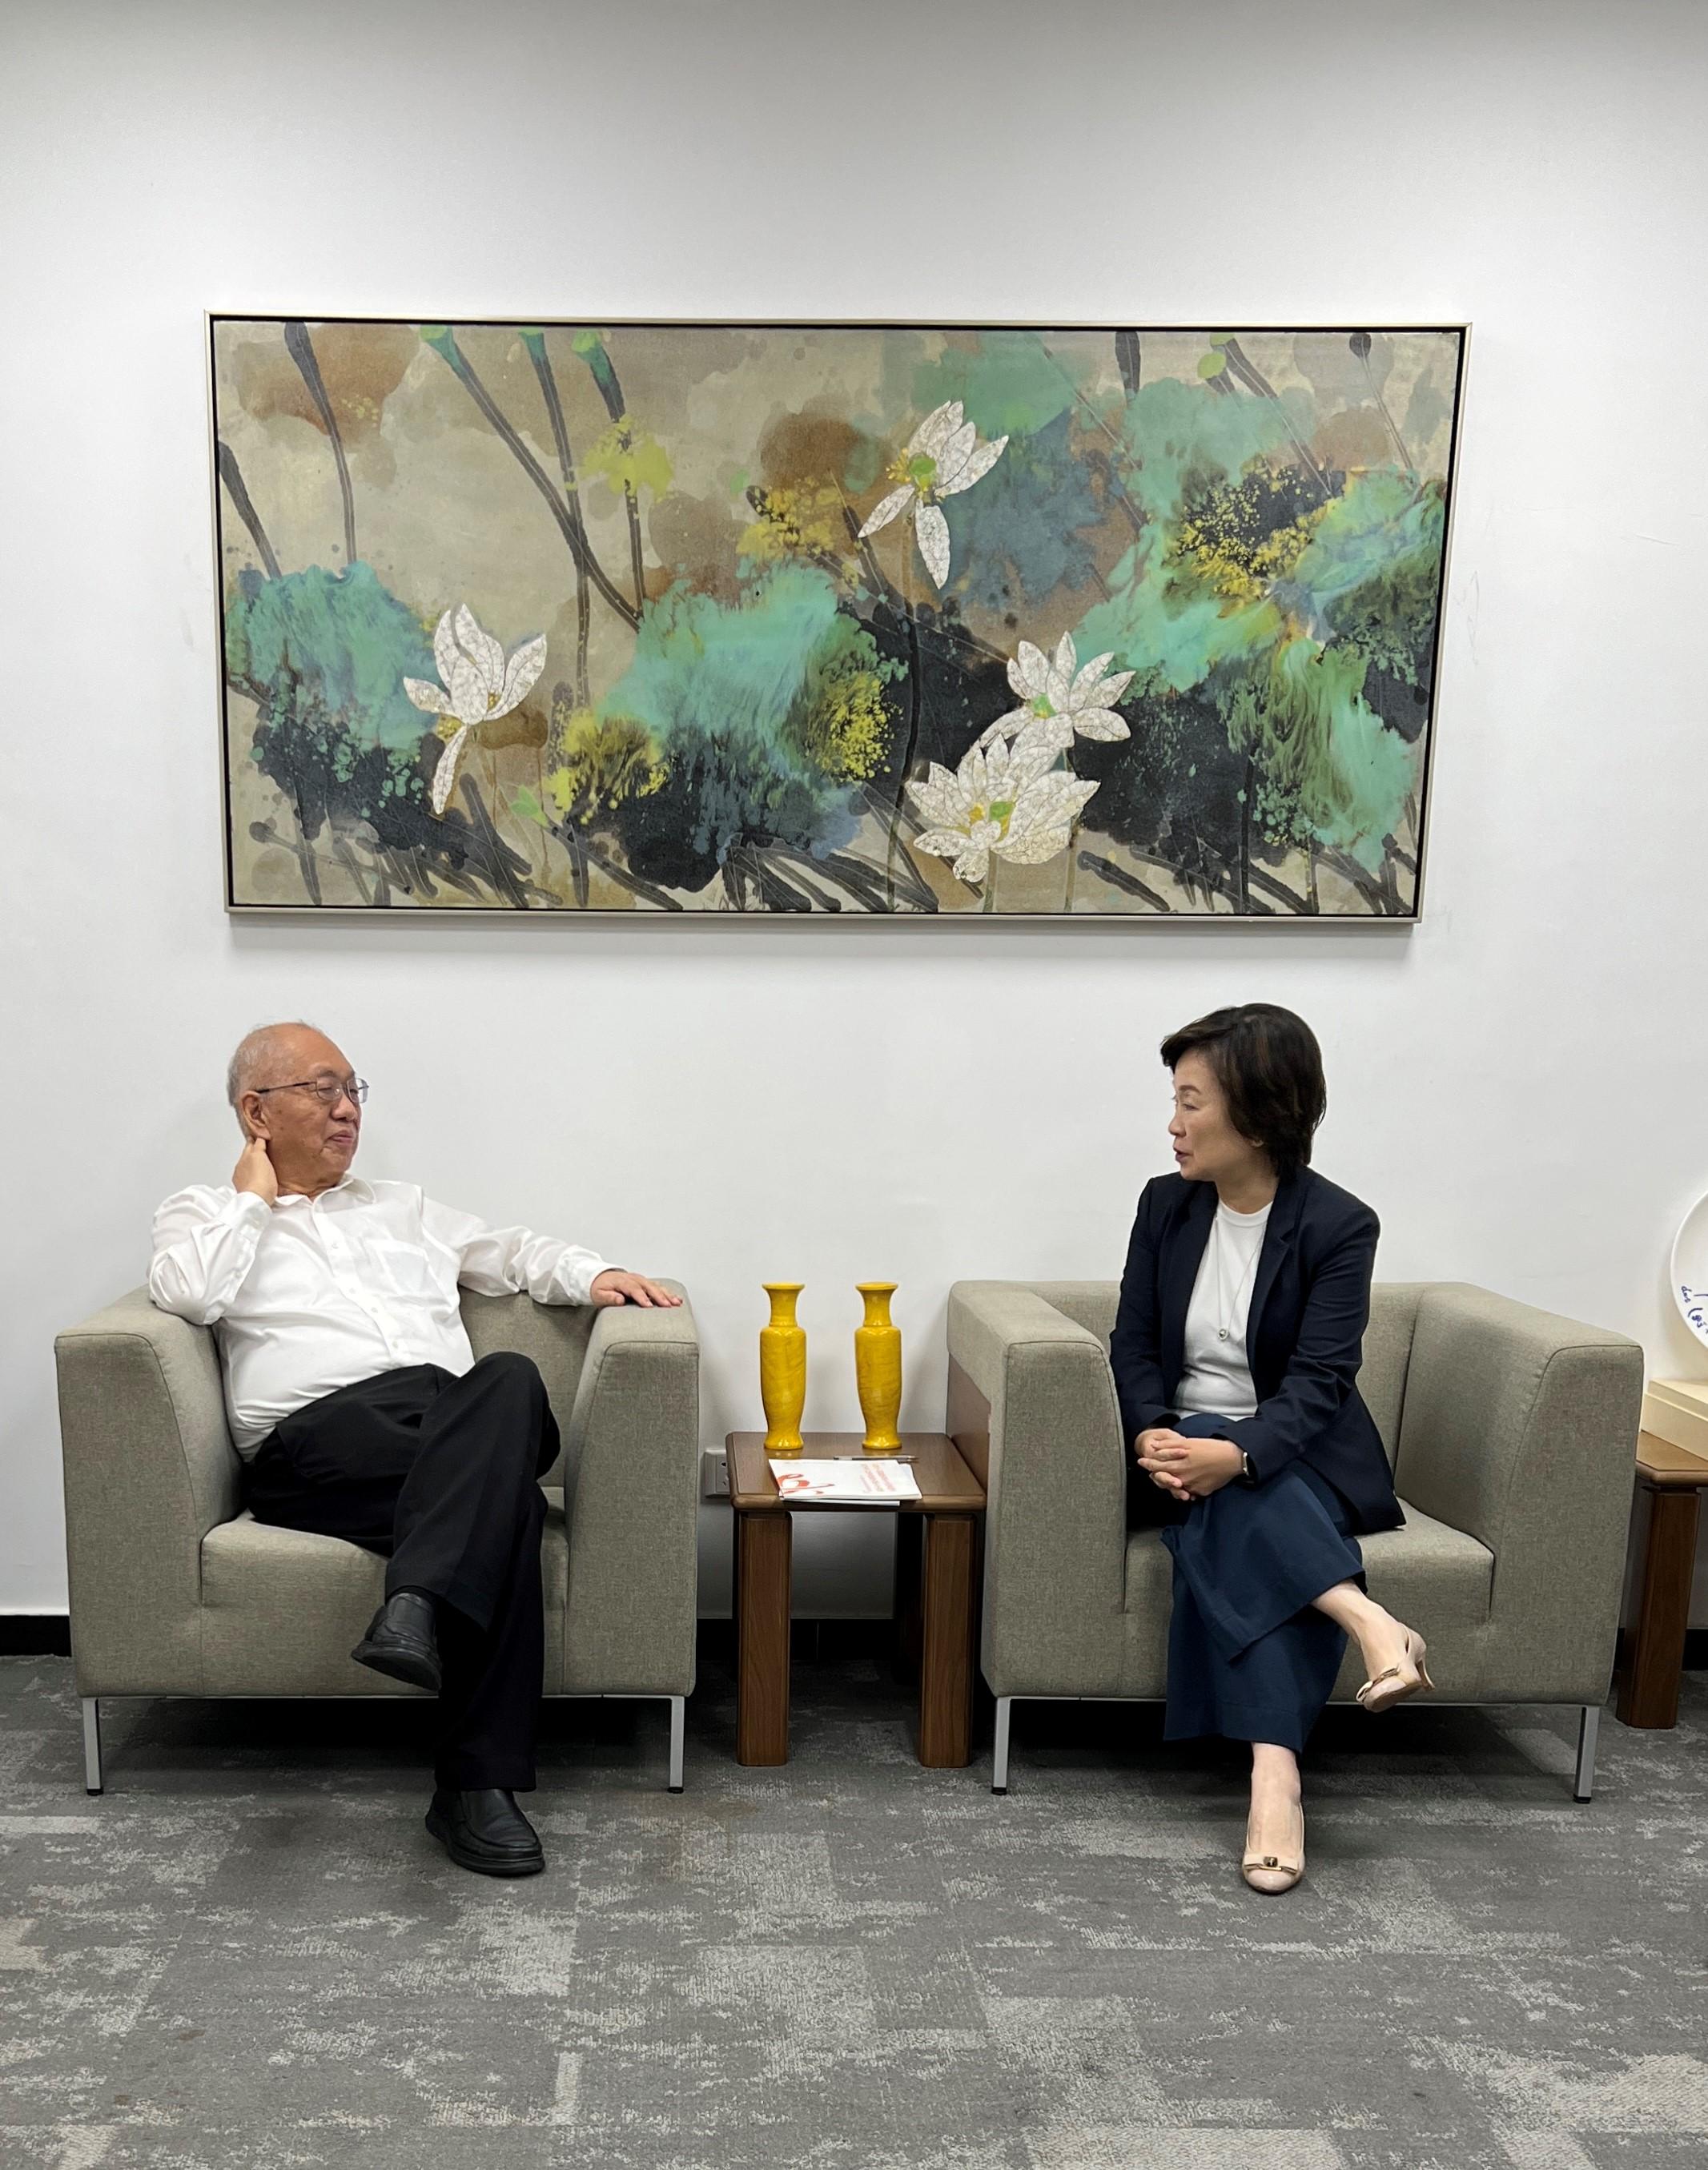 The Secretary of Education, Dr Choi Yuk-lin (right), visits Tsinghua University in Beijing today (September 26) and meets the Dean of Qiuzhen College, Professor Yau Shing-tung (left).